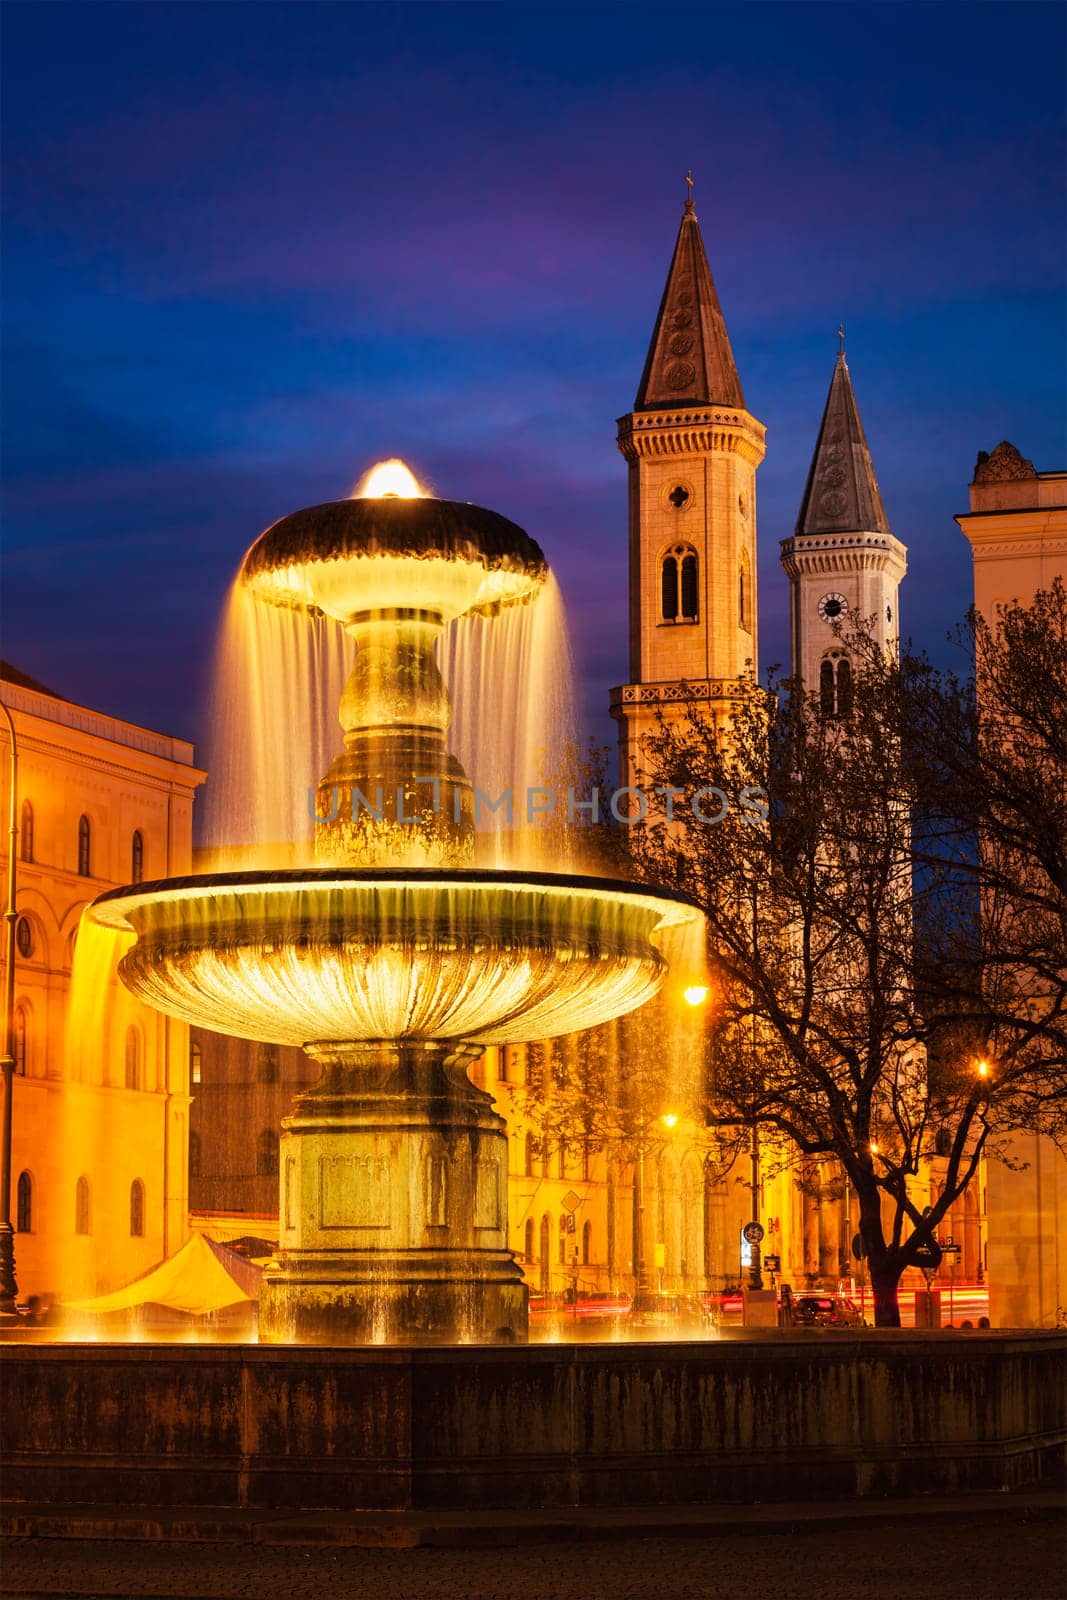 Fountain in the Geschwister-Scholl-Platz and St. Ludwig's Church (Ludwigskirche) in the evening. Munich, Bavaria, Germany